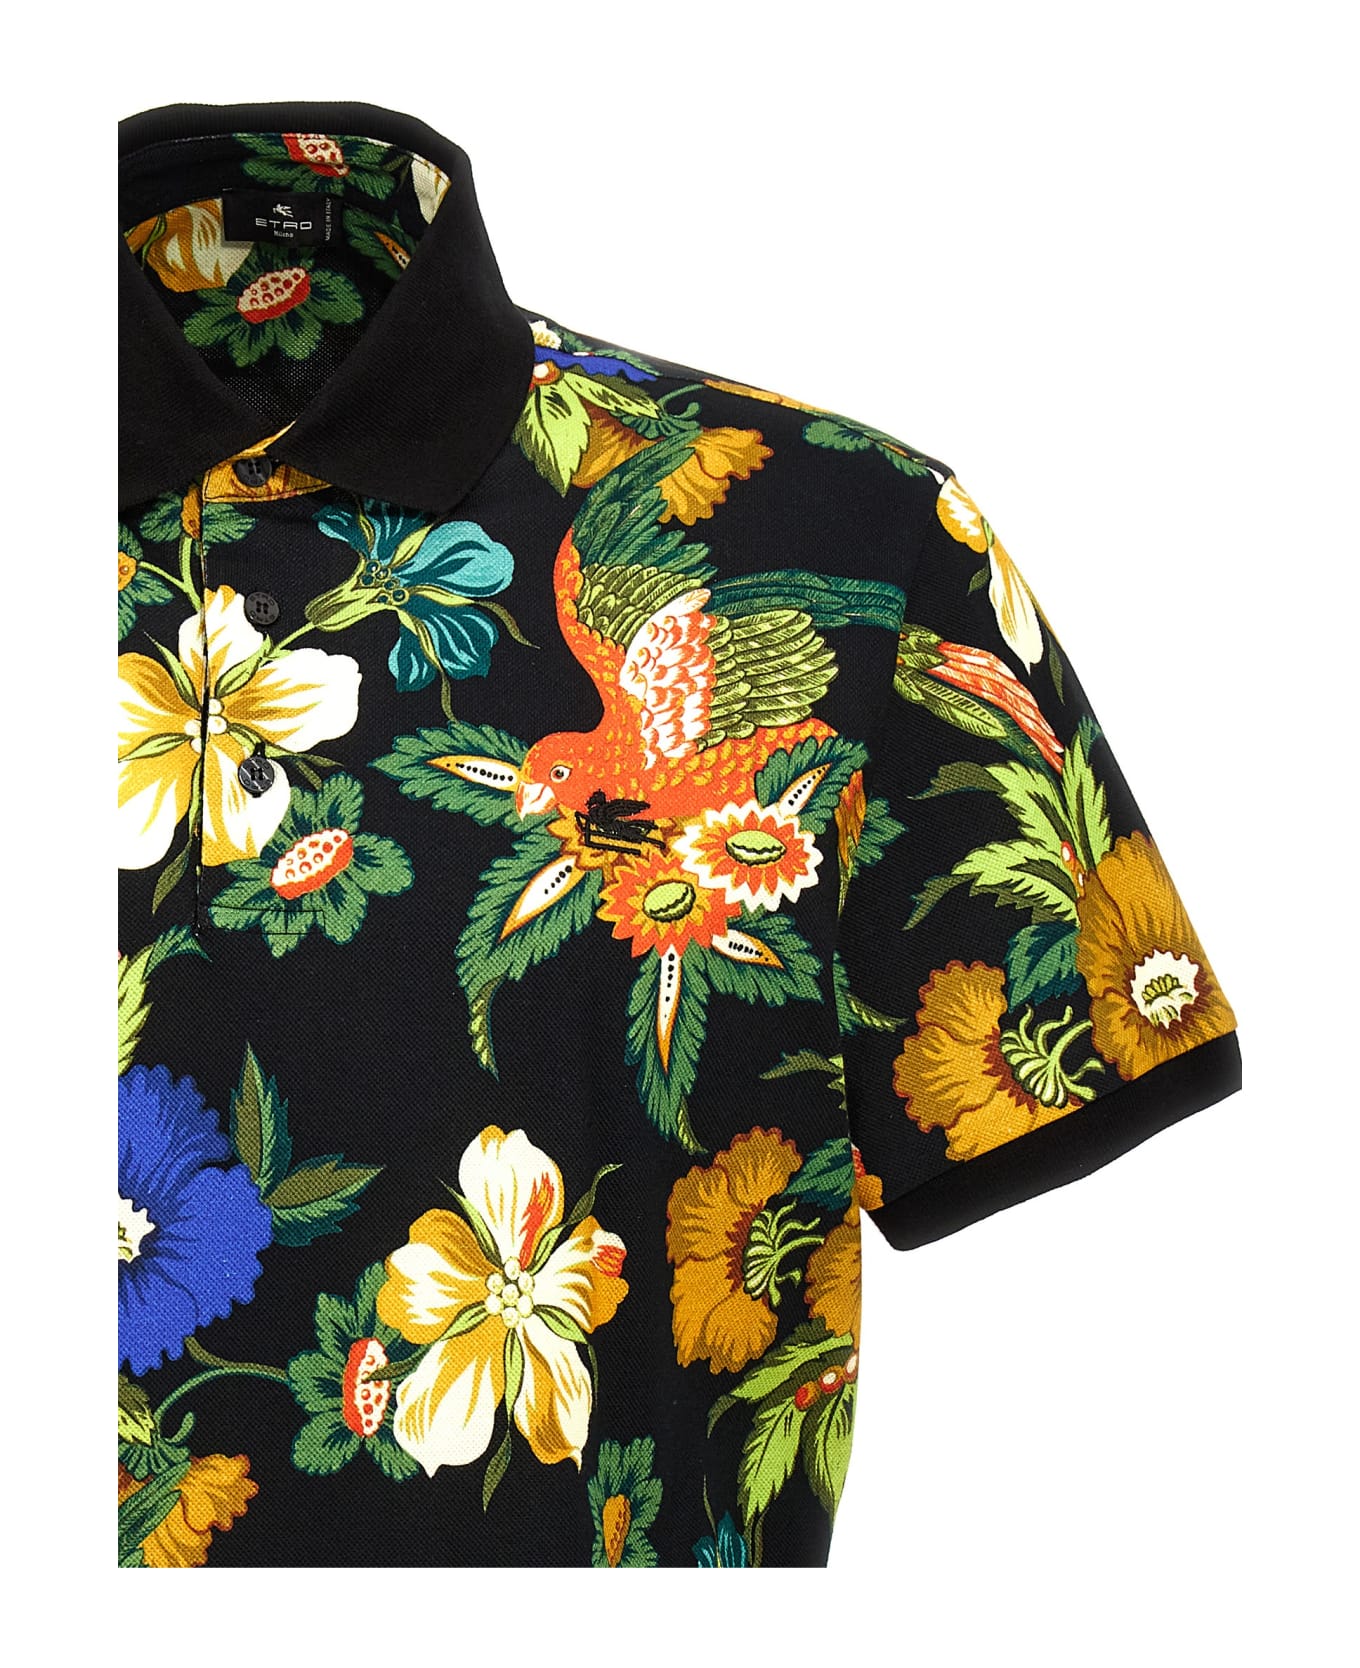 Etro Patterned Polo Shirt - Multicolor